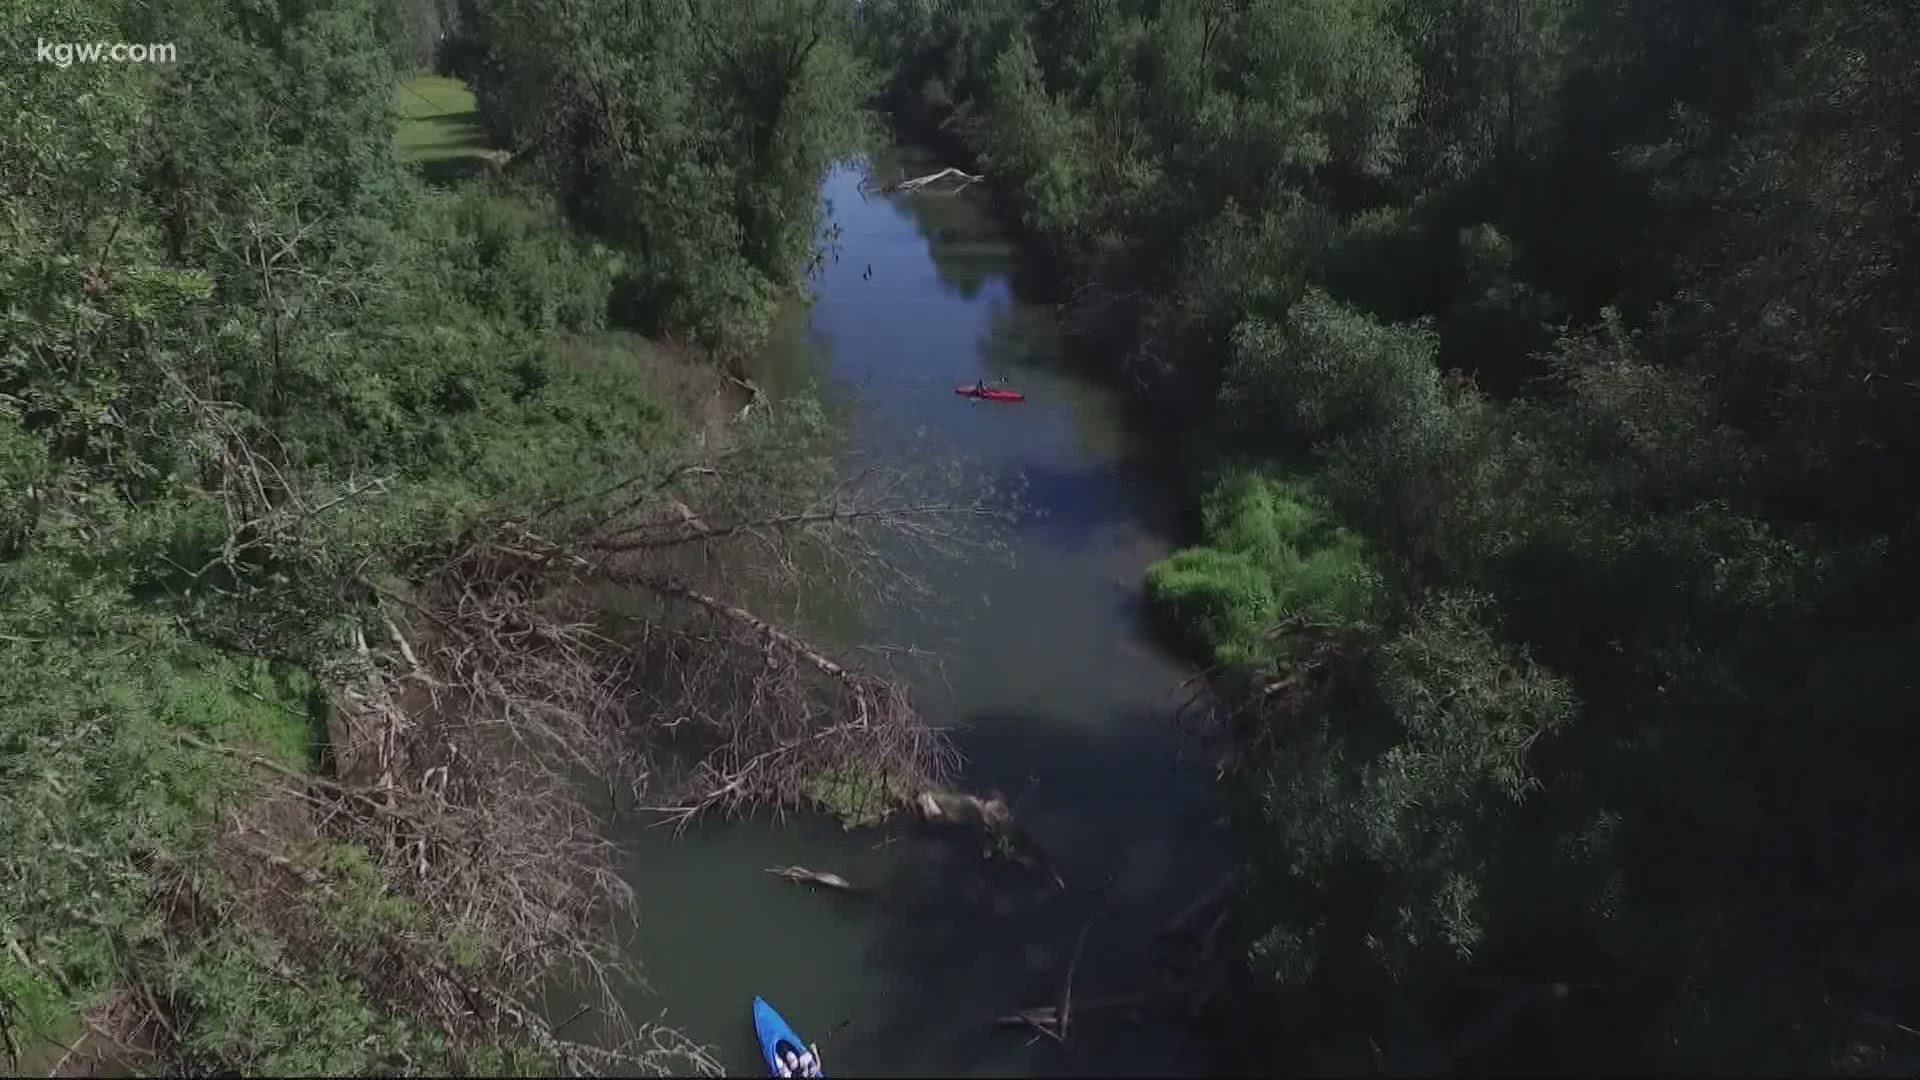 Grant McOmie takes us on a getaway down the Tualatin River.